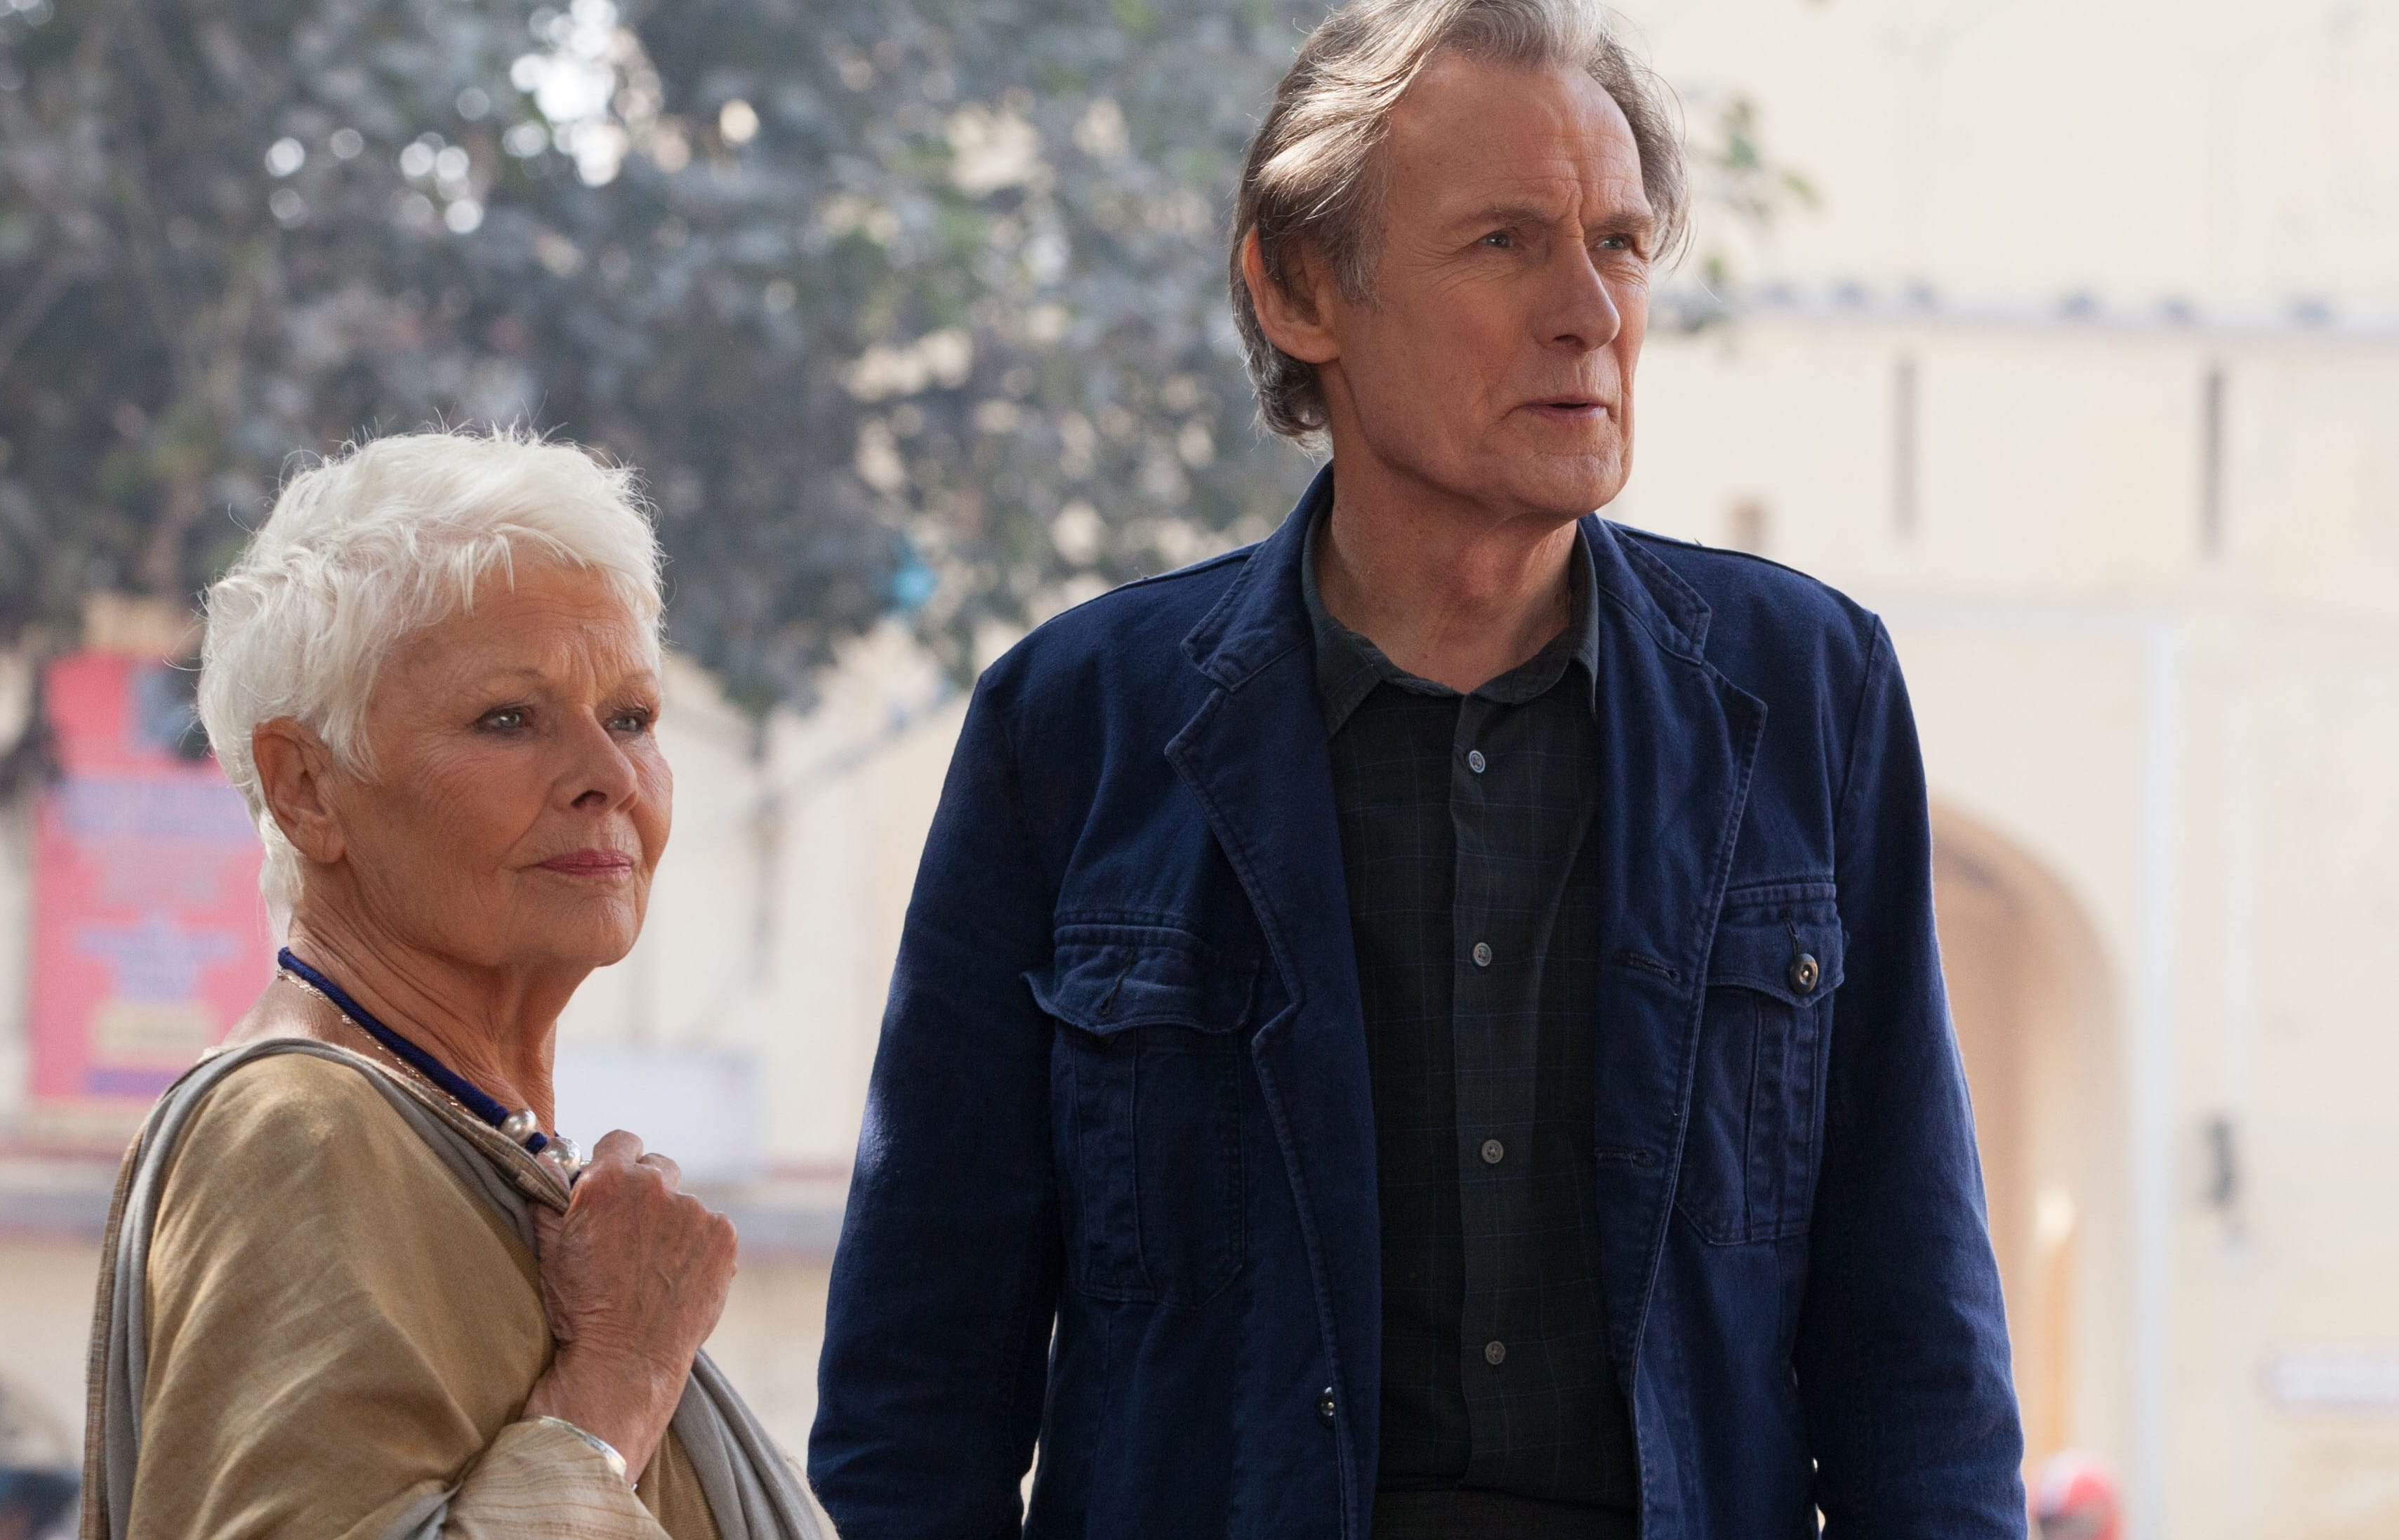 Judy Dench and Bill Nighy in The Best Marigold Hotel.